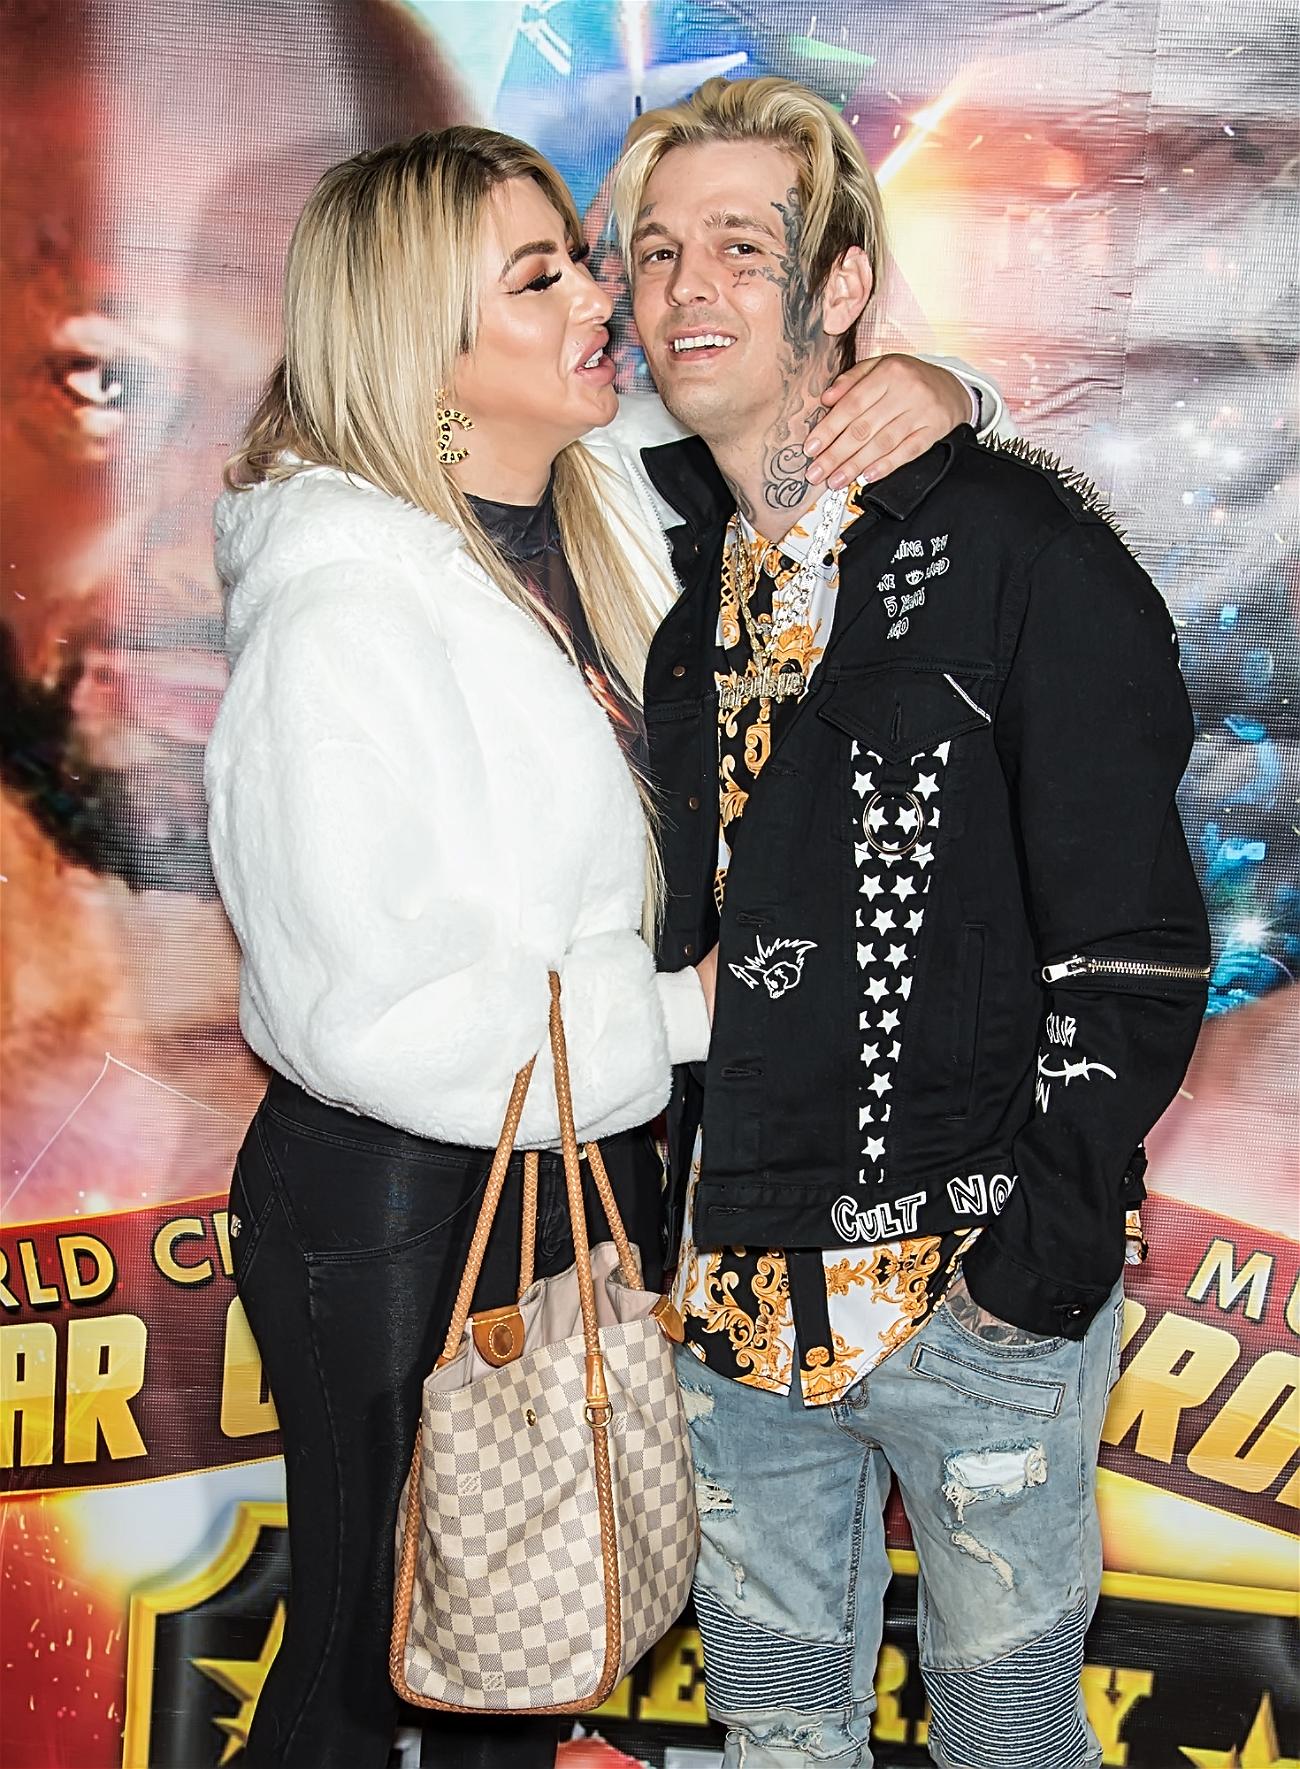 Melanie Martin & Aaron Carter at Celebrity Boxing event in Philadelphia, PA